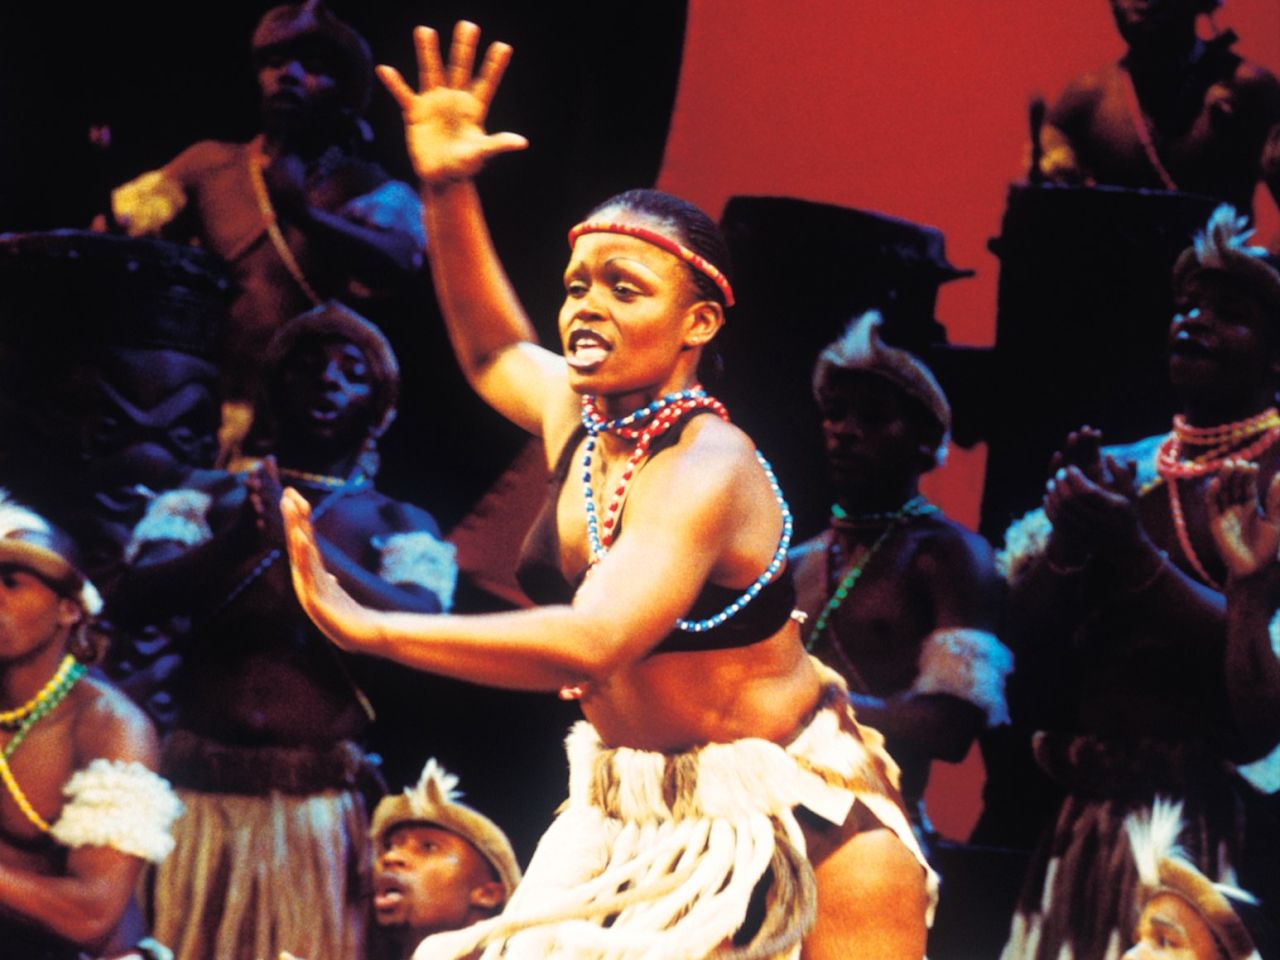 There are around nine different languages featured in the show, which represents South Africa's diversity.